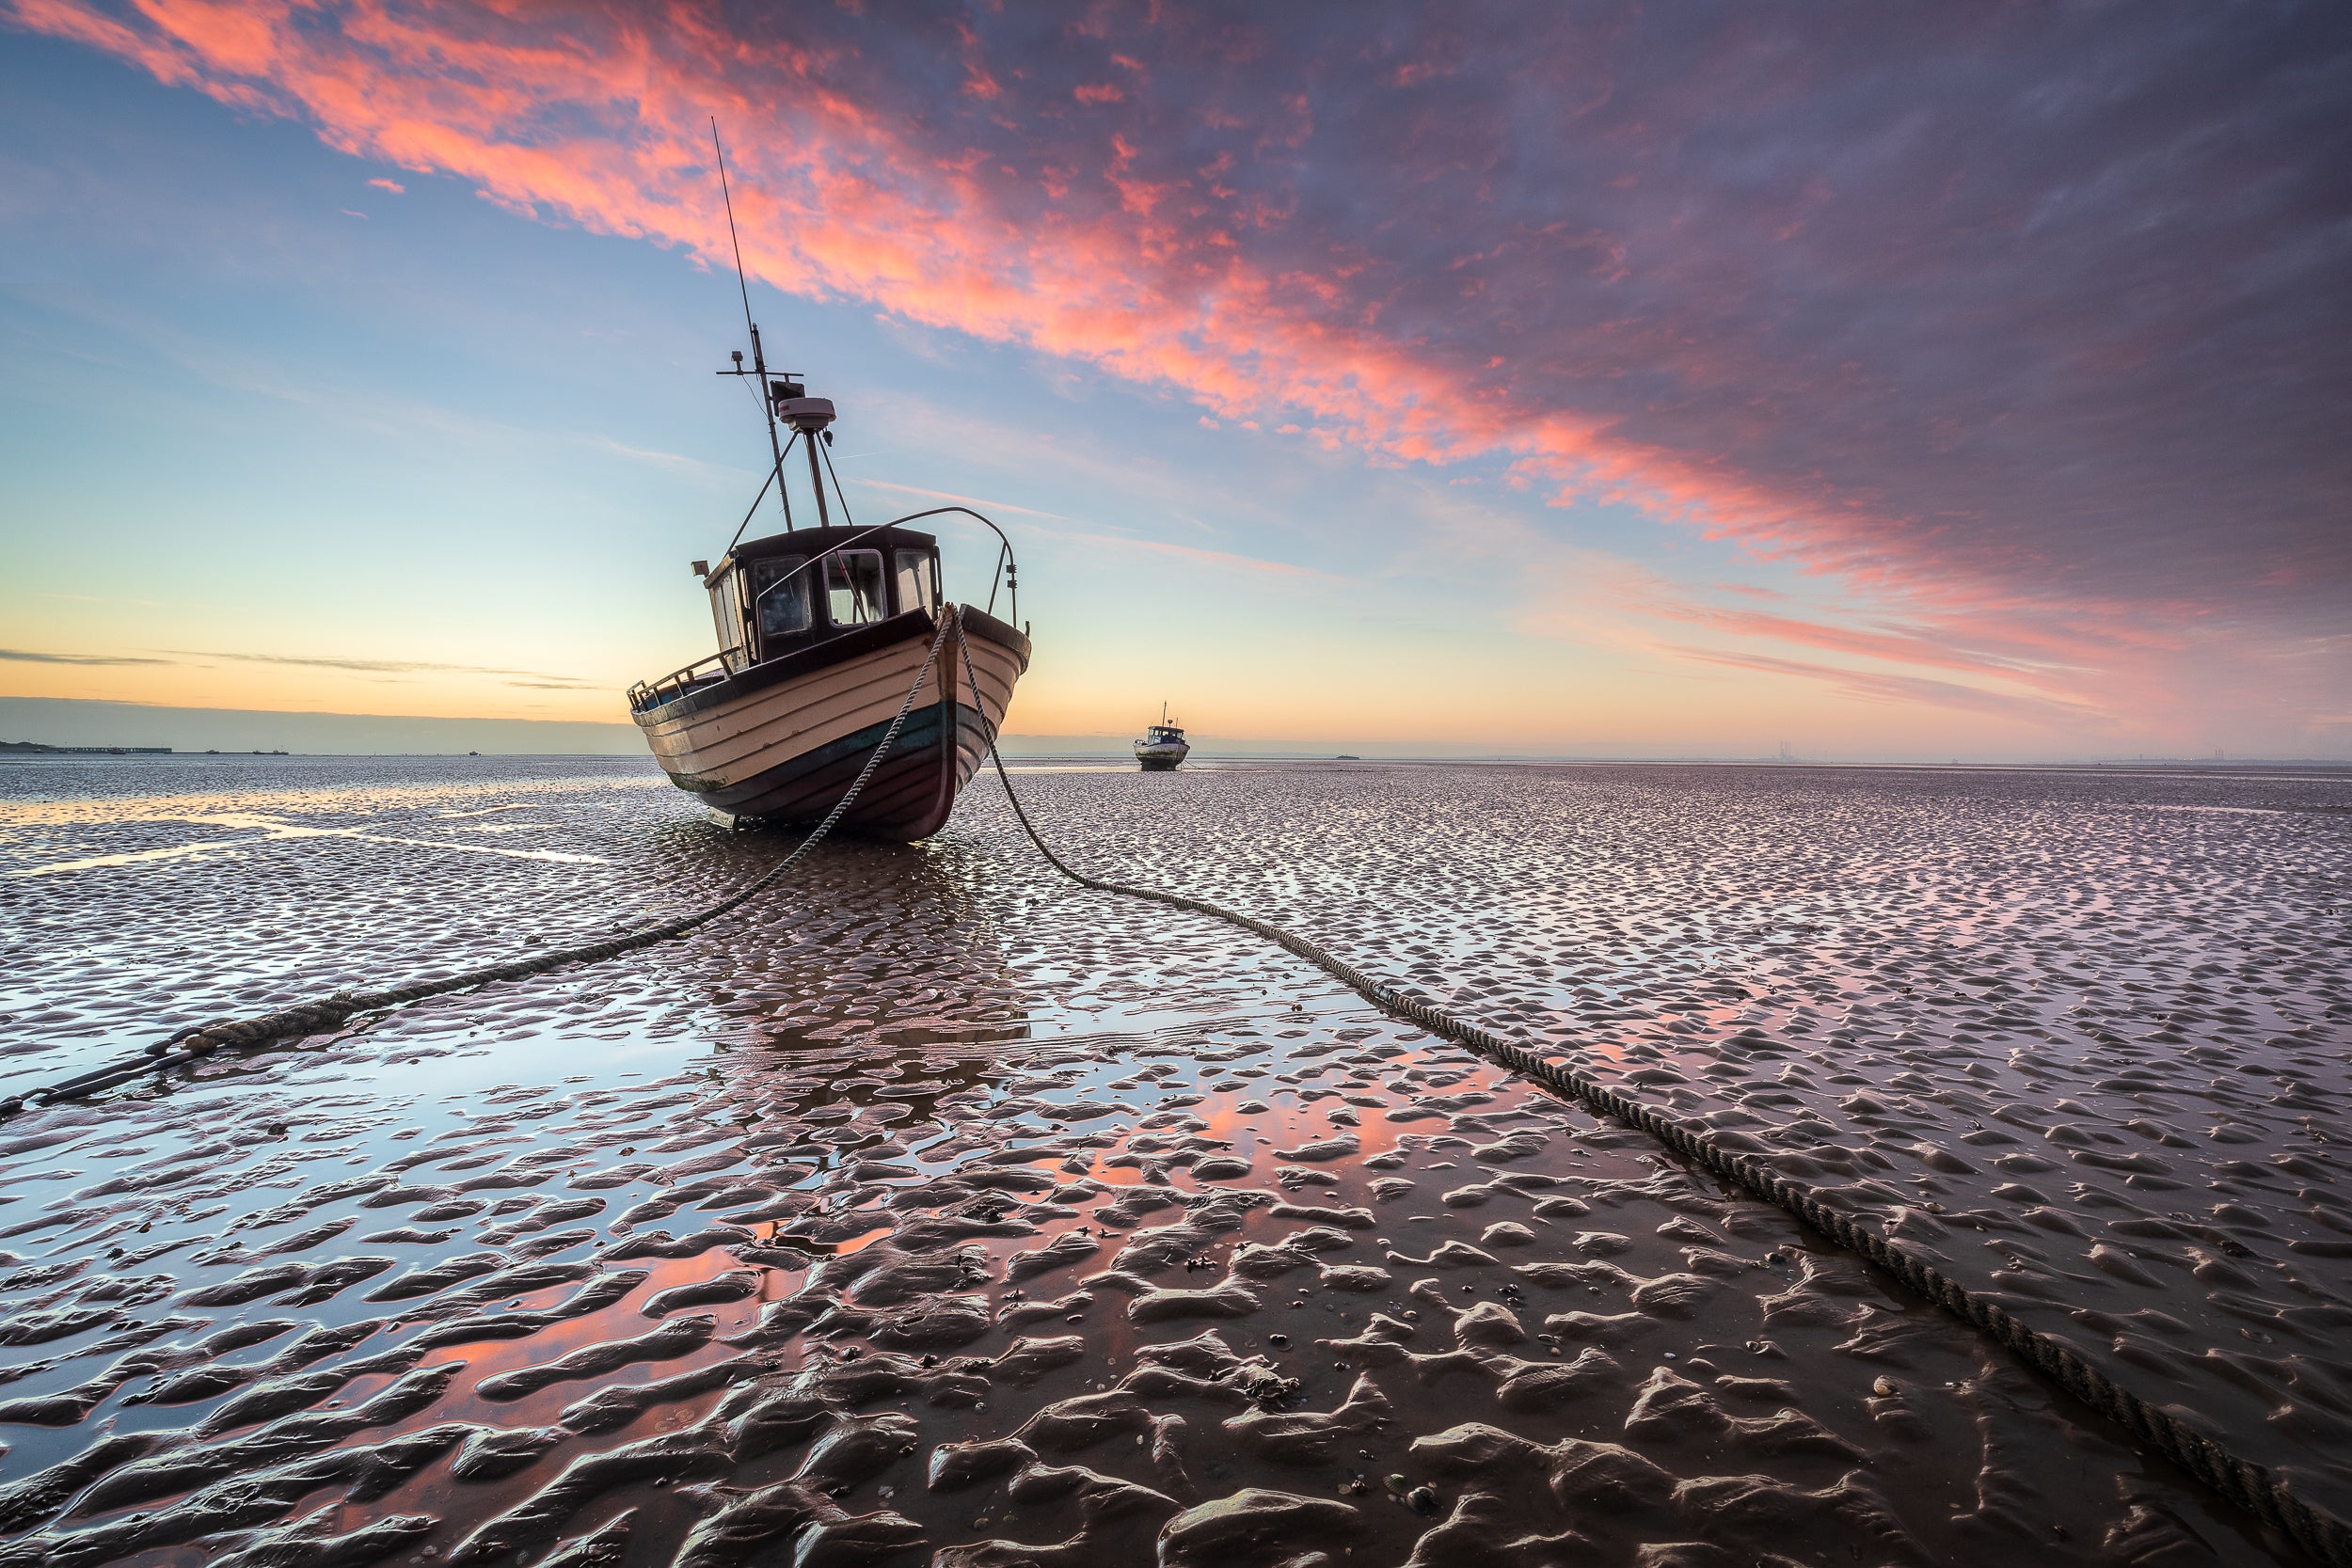 Justin Minns also won the Ships and Wrecks category with this image, ‘Scattered’, taken at Thames Estuary, Essex (Justin Minns/Shipwrecked Mariners’ Society)